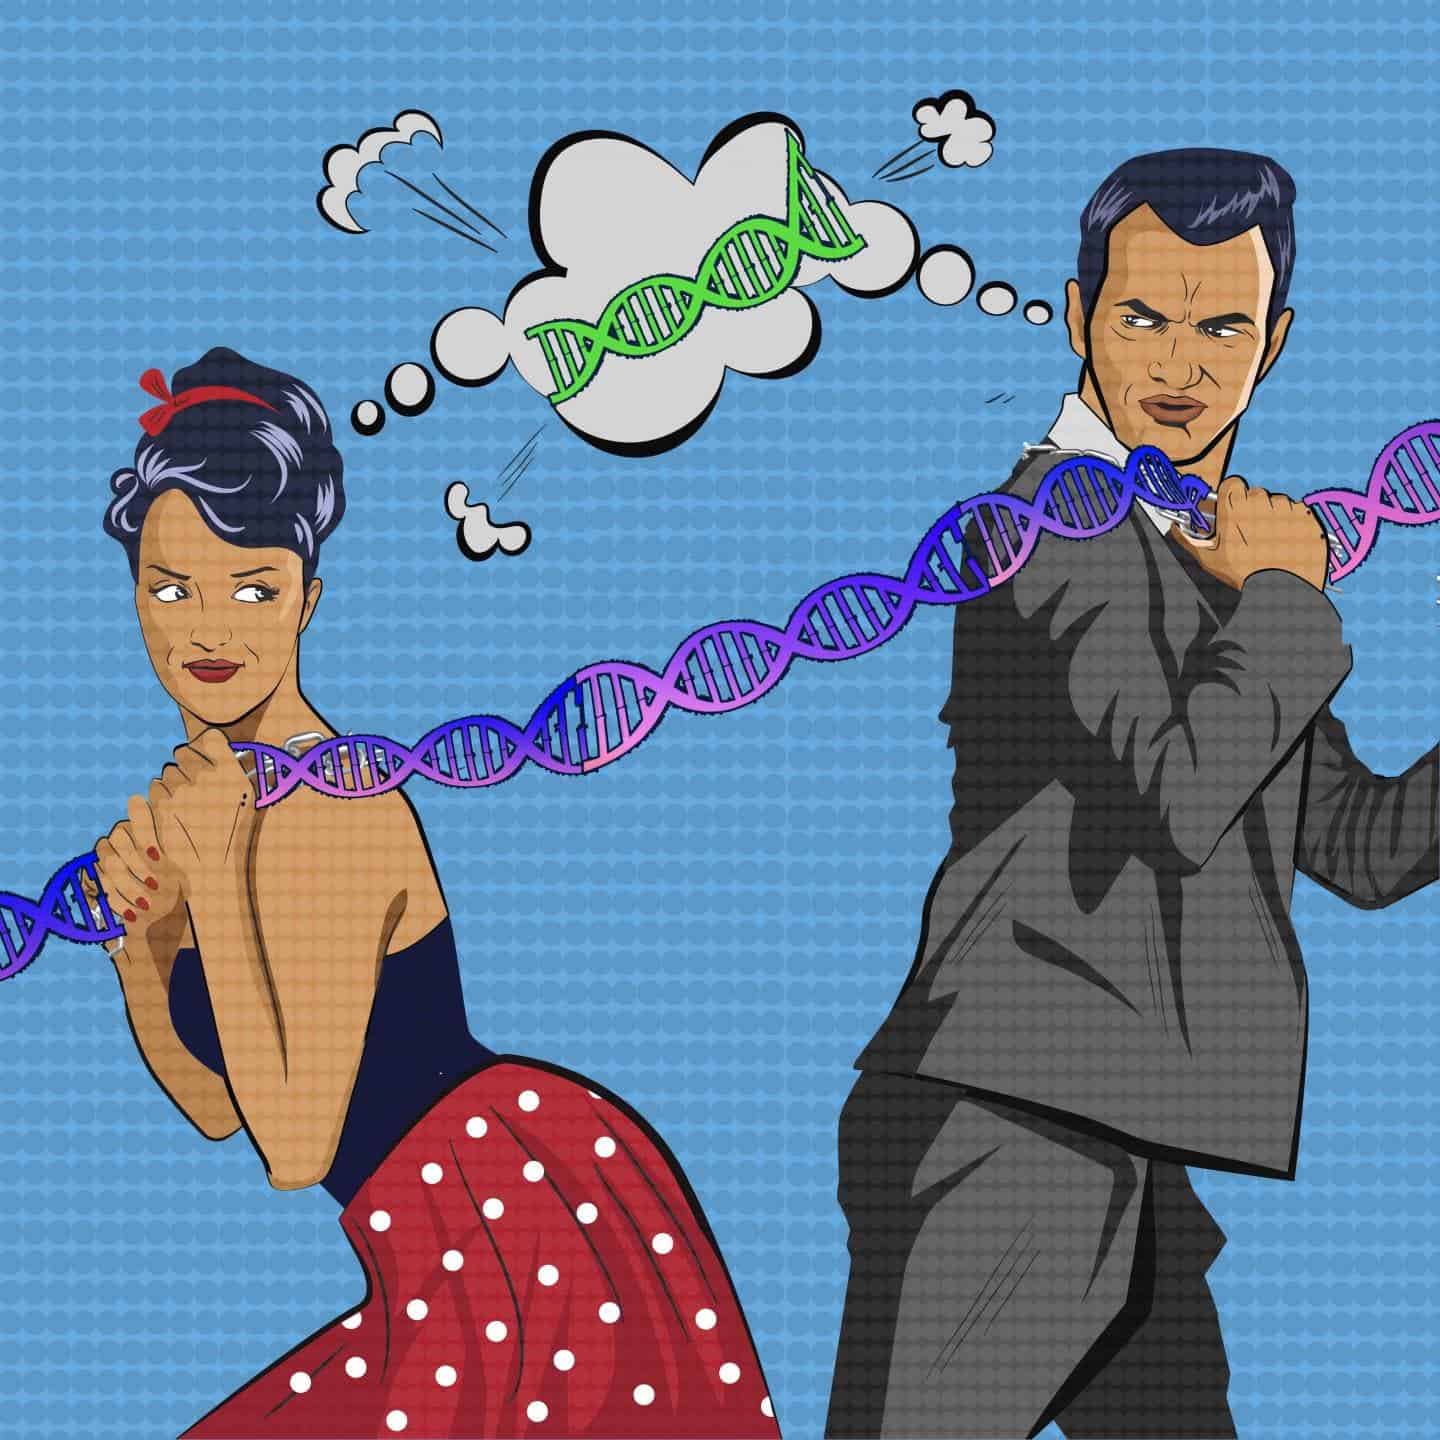 6500 genes are expressed differently in men and women. Image credits: Weizmann Institute of Science.